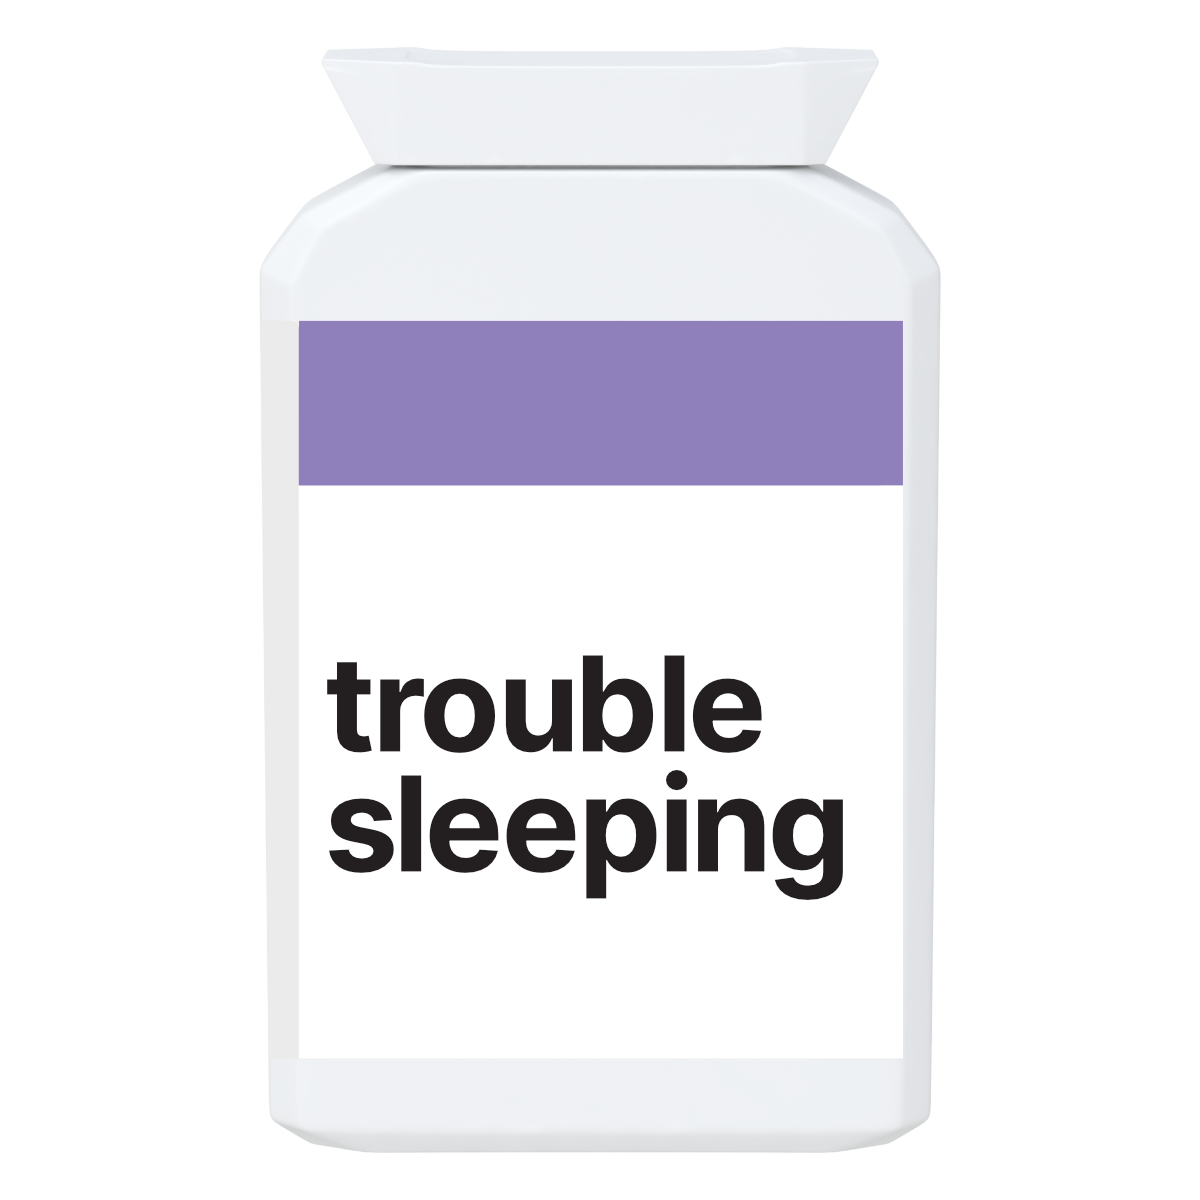 Products to help with Sleep